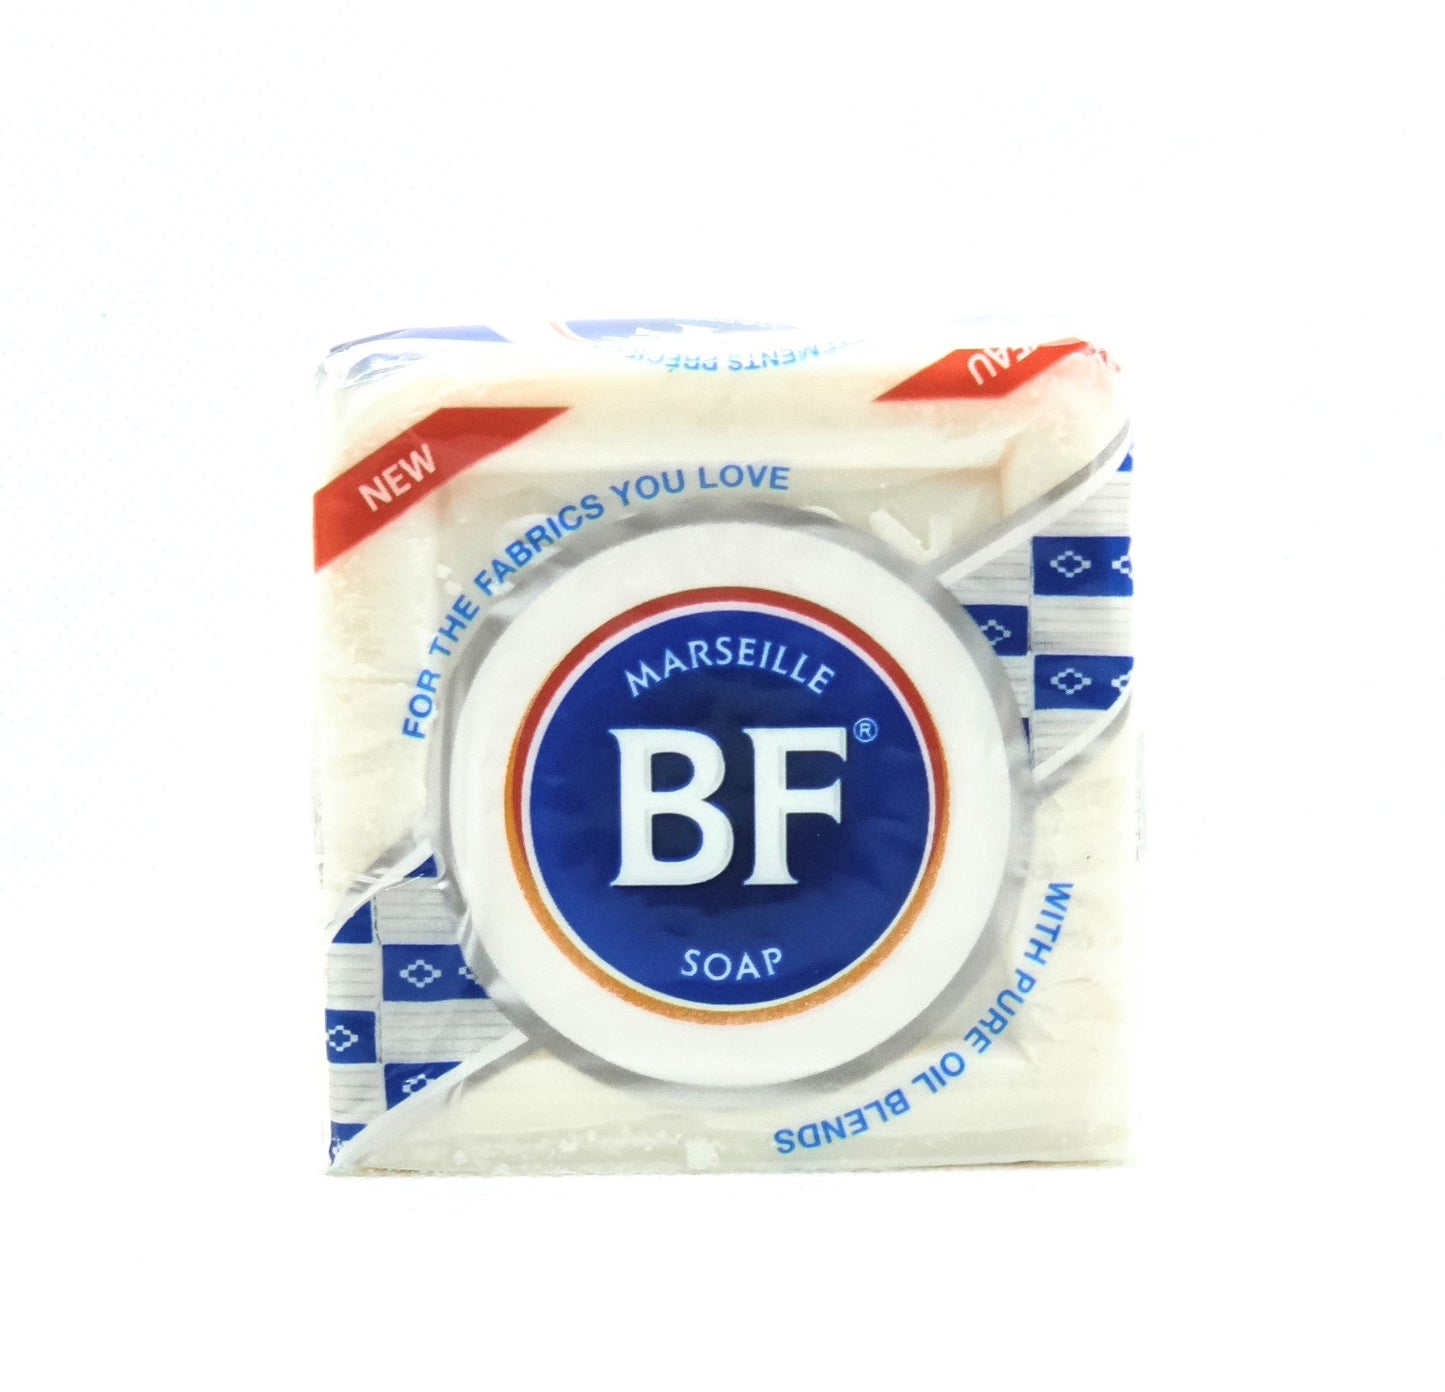 290 gram packaging of bf laundry soap